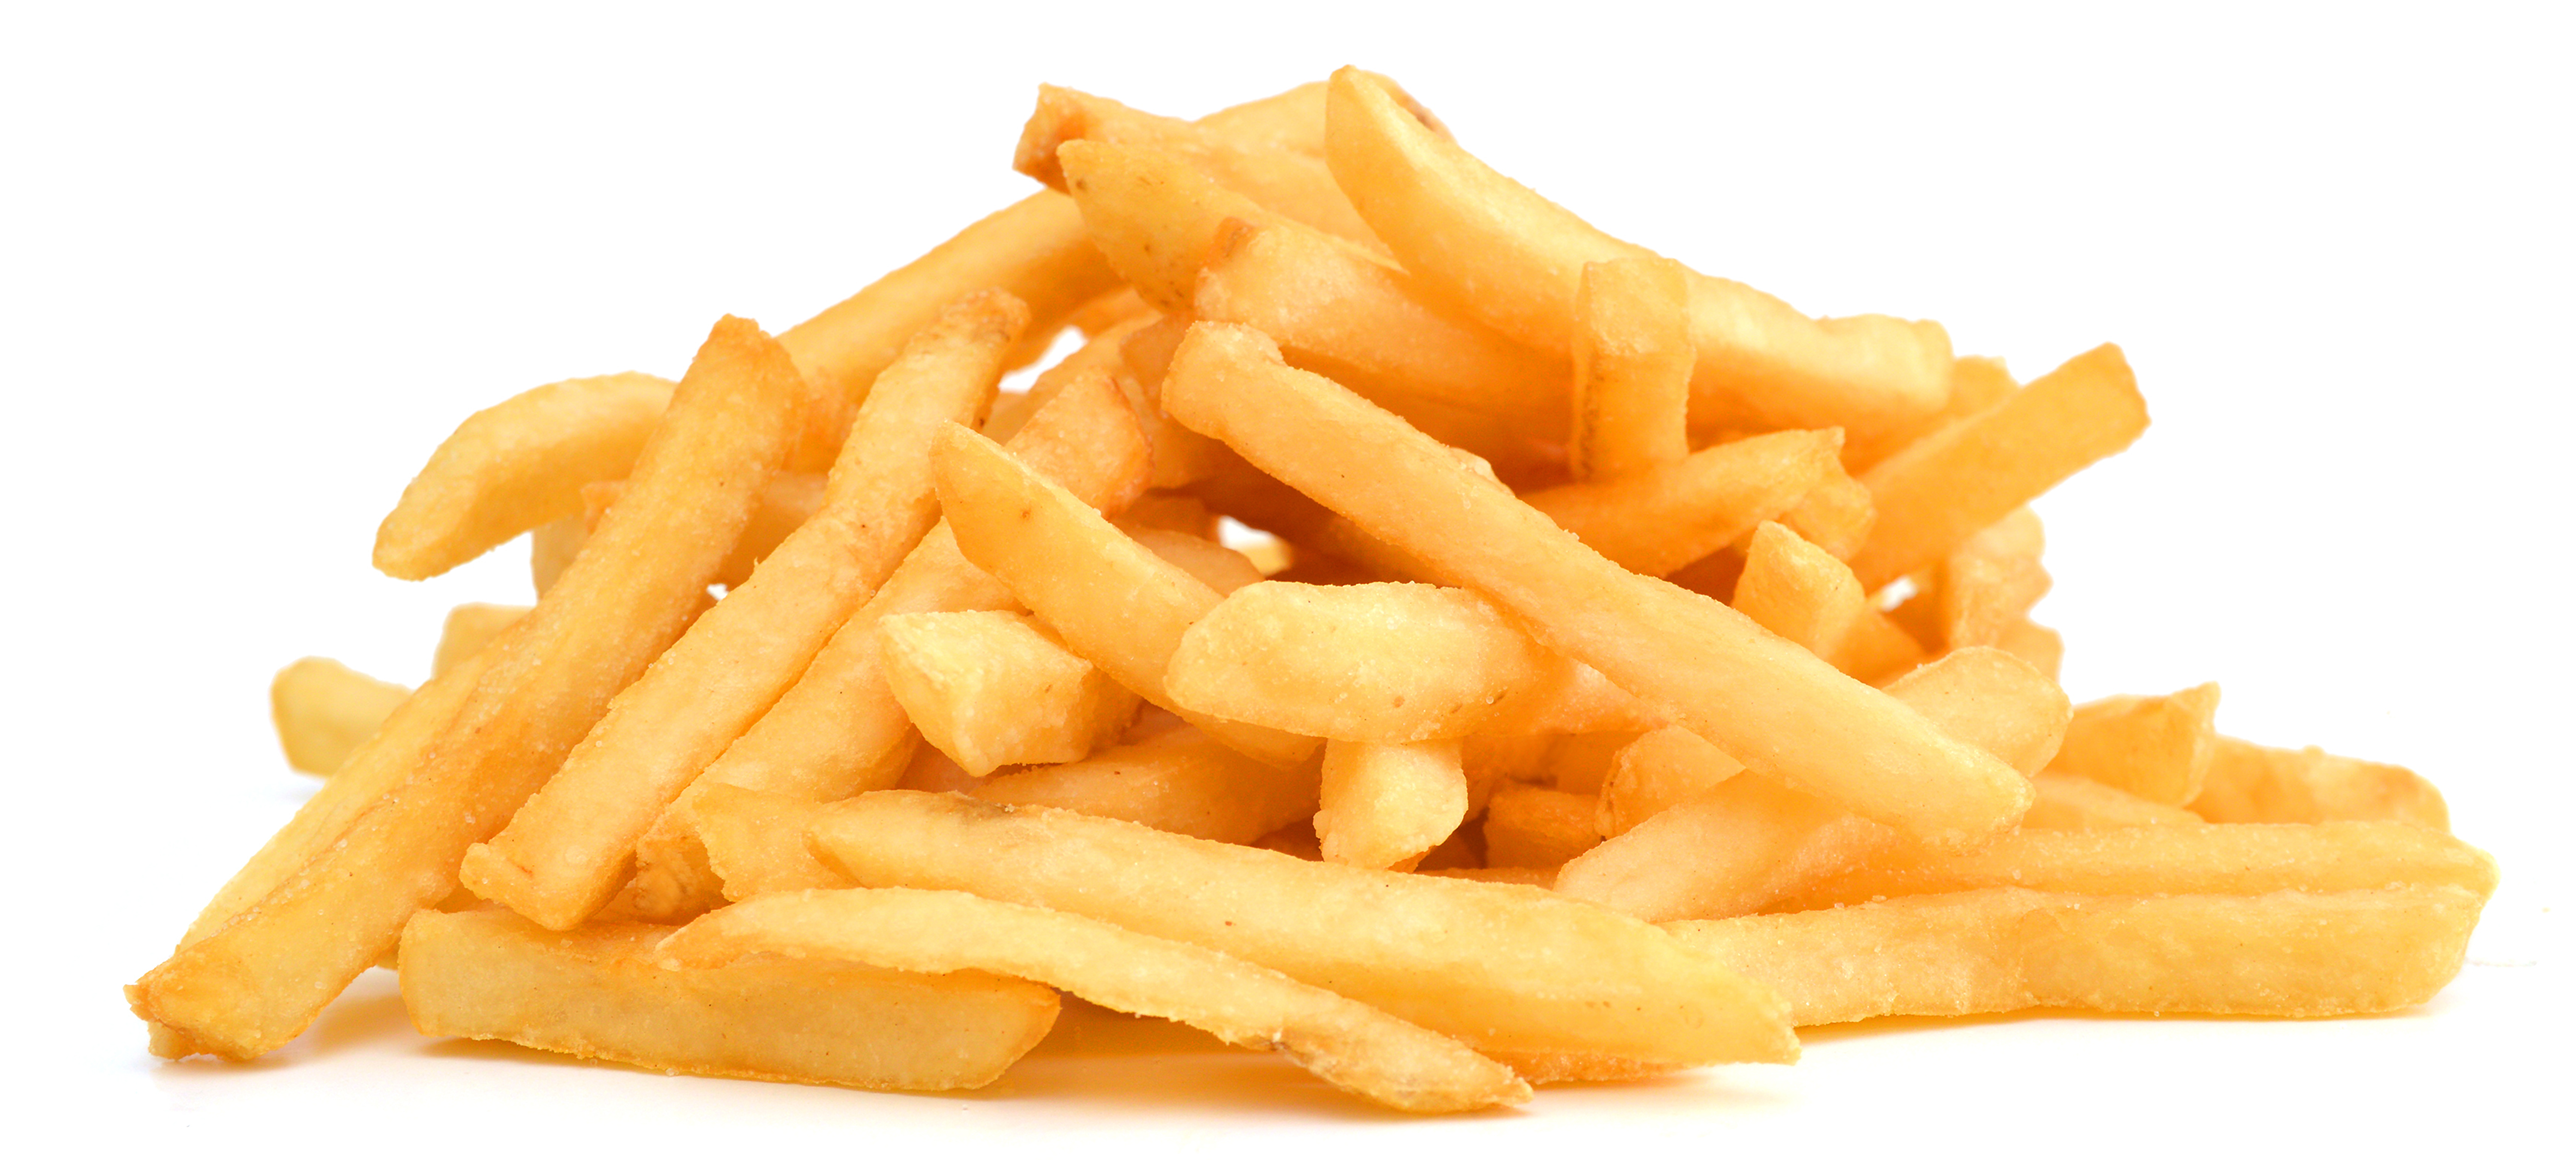 S3.amazonaws Pluspng Pluspng.com   Fries Hd Png - French Fries, Transparent background PNG HD thumbnail